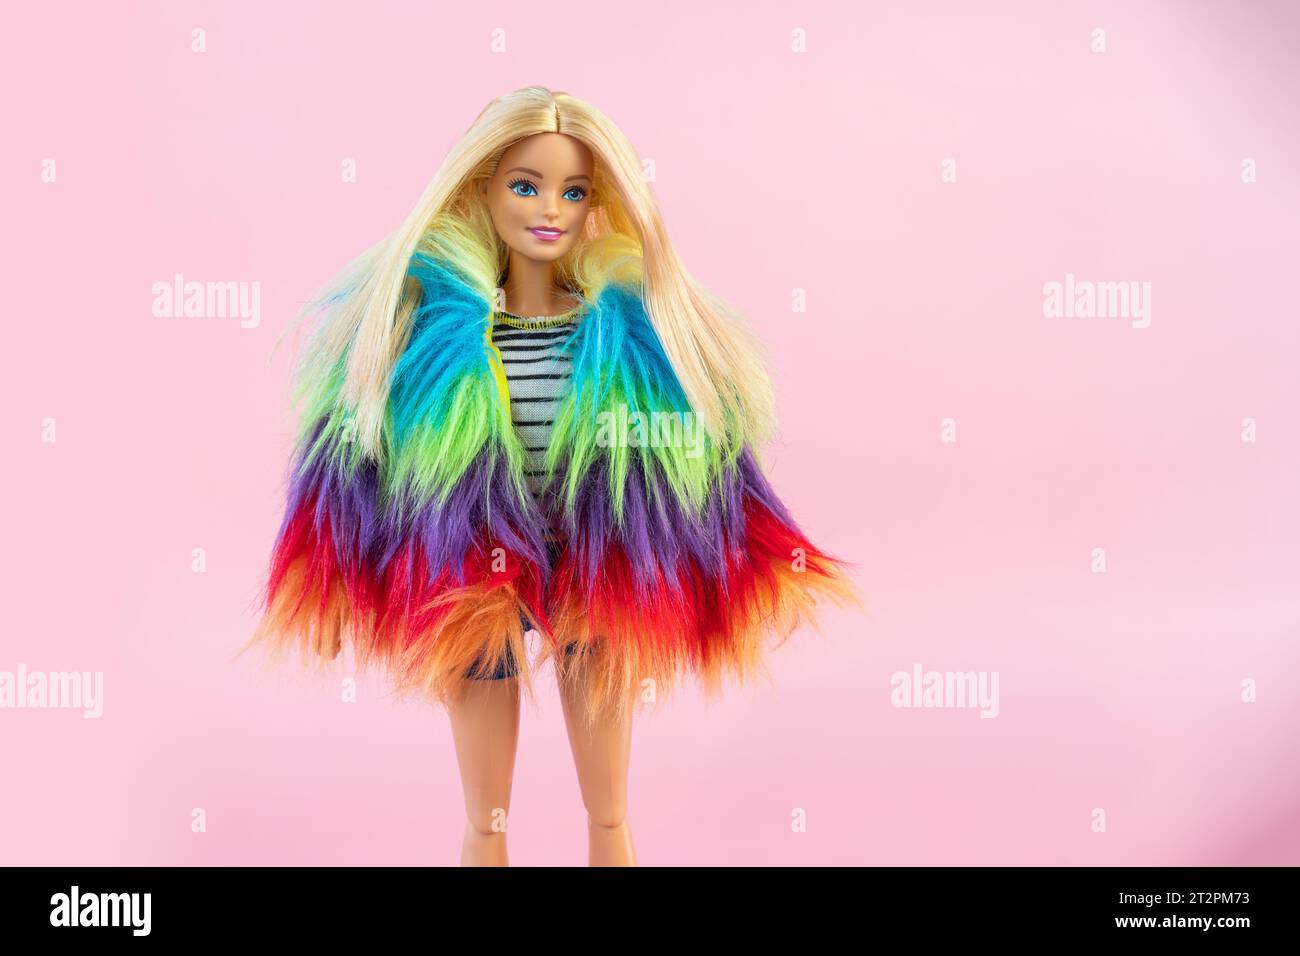 October 9, 2023. Barnaul, Russia: Barbie doll with loose blond hair standing on a pink background. Stock Photo